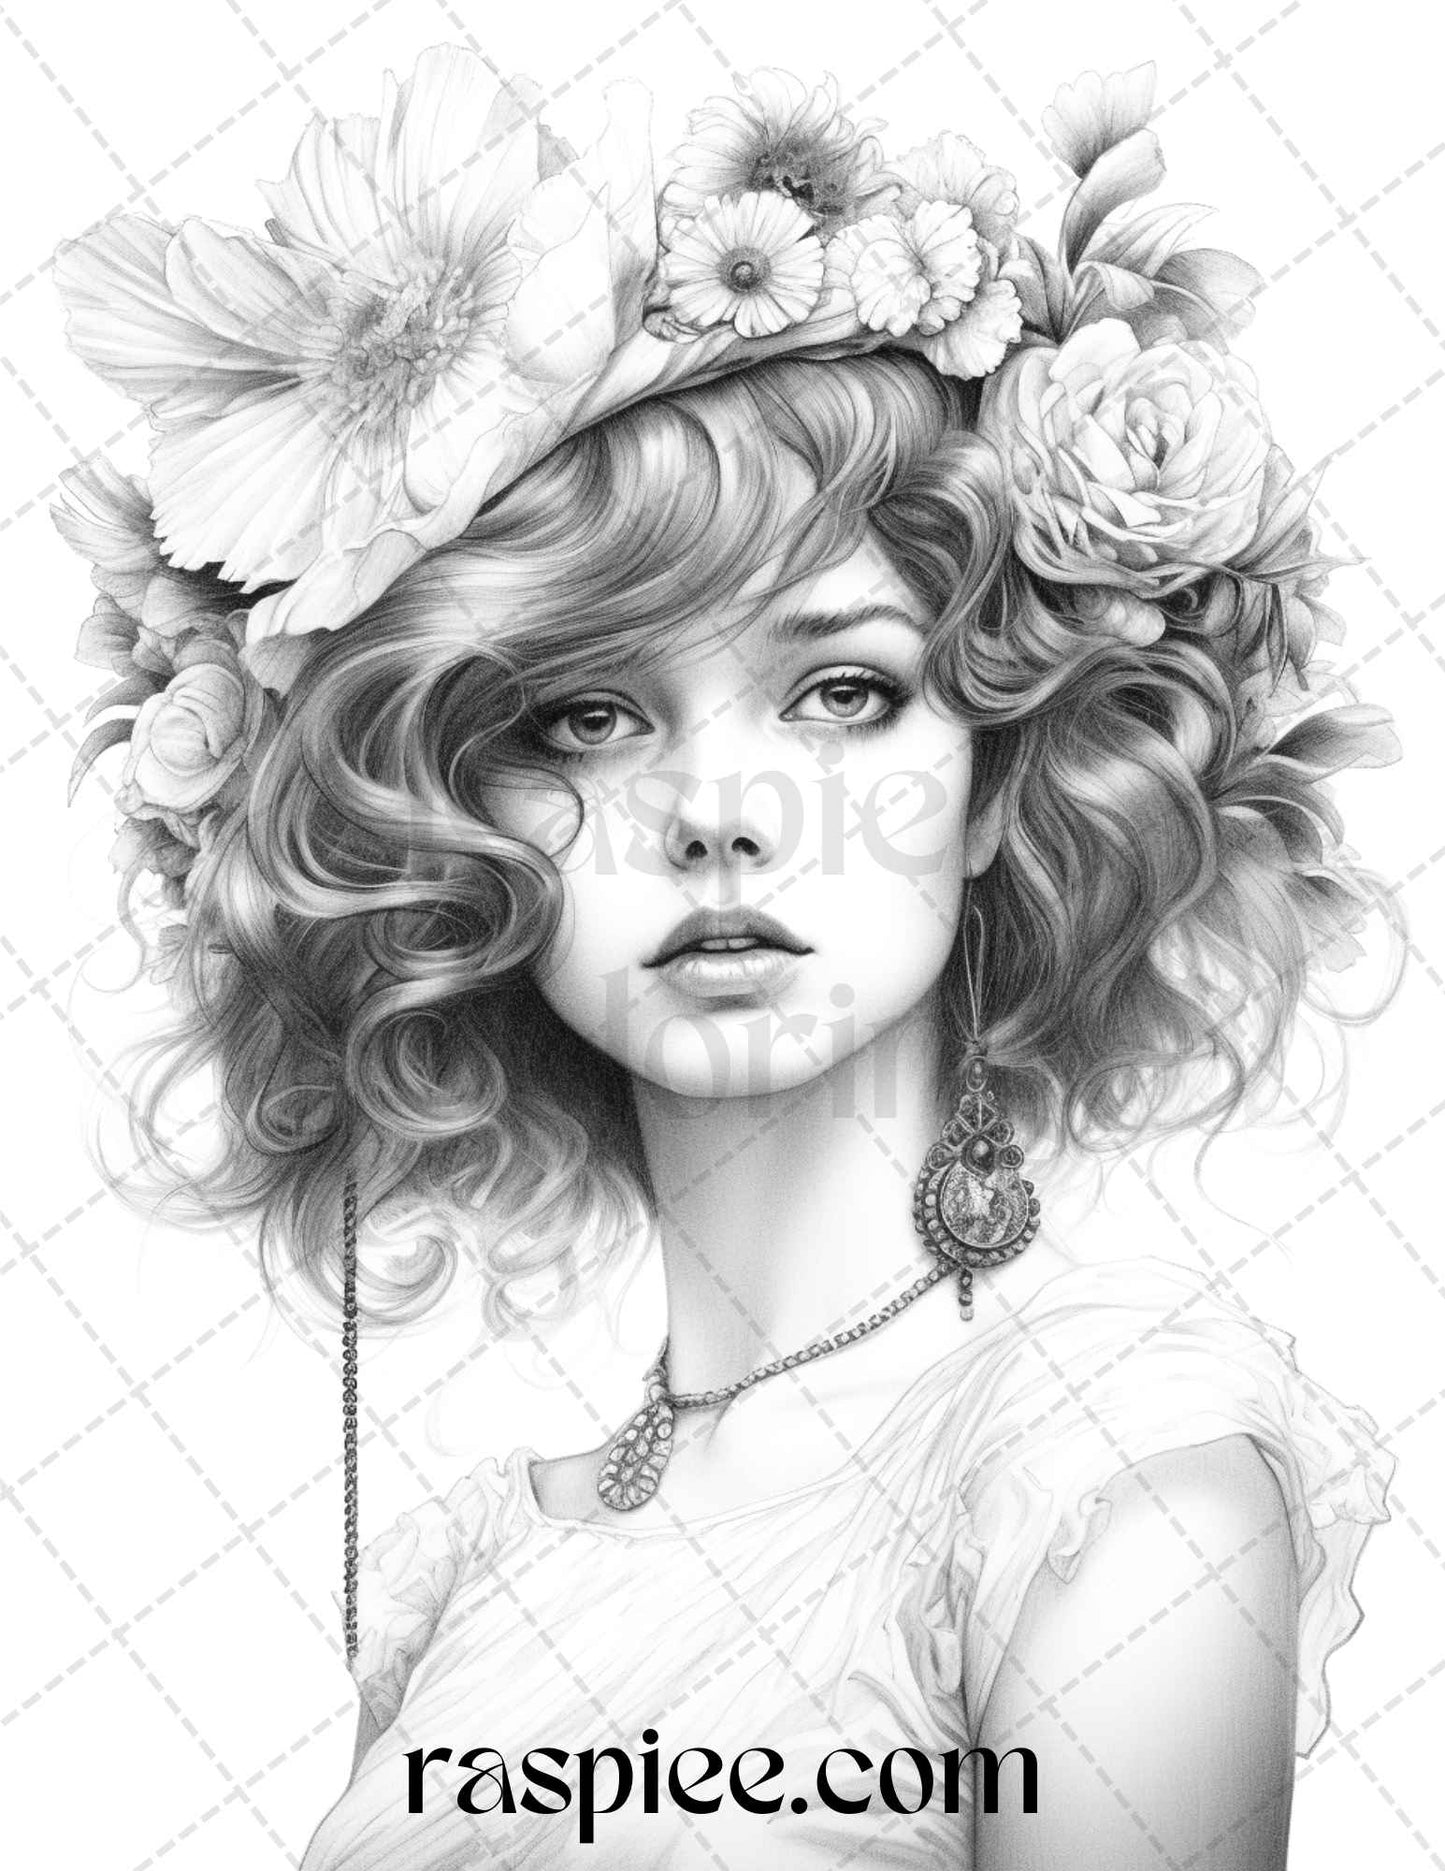 gatsby girls grayscale coloring page, printable coloring book for adults, vintage art deco coloring page, portrait coloring pages for adults